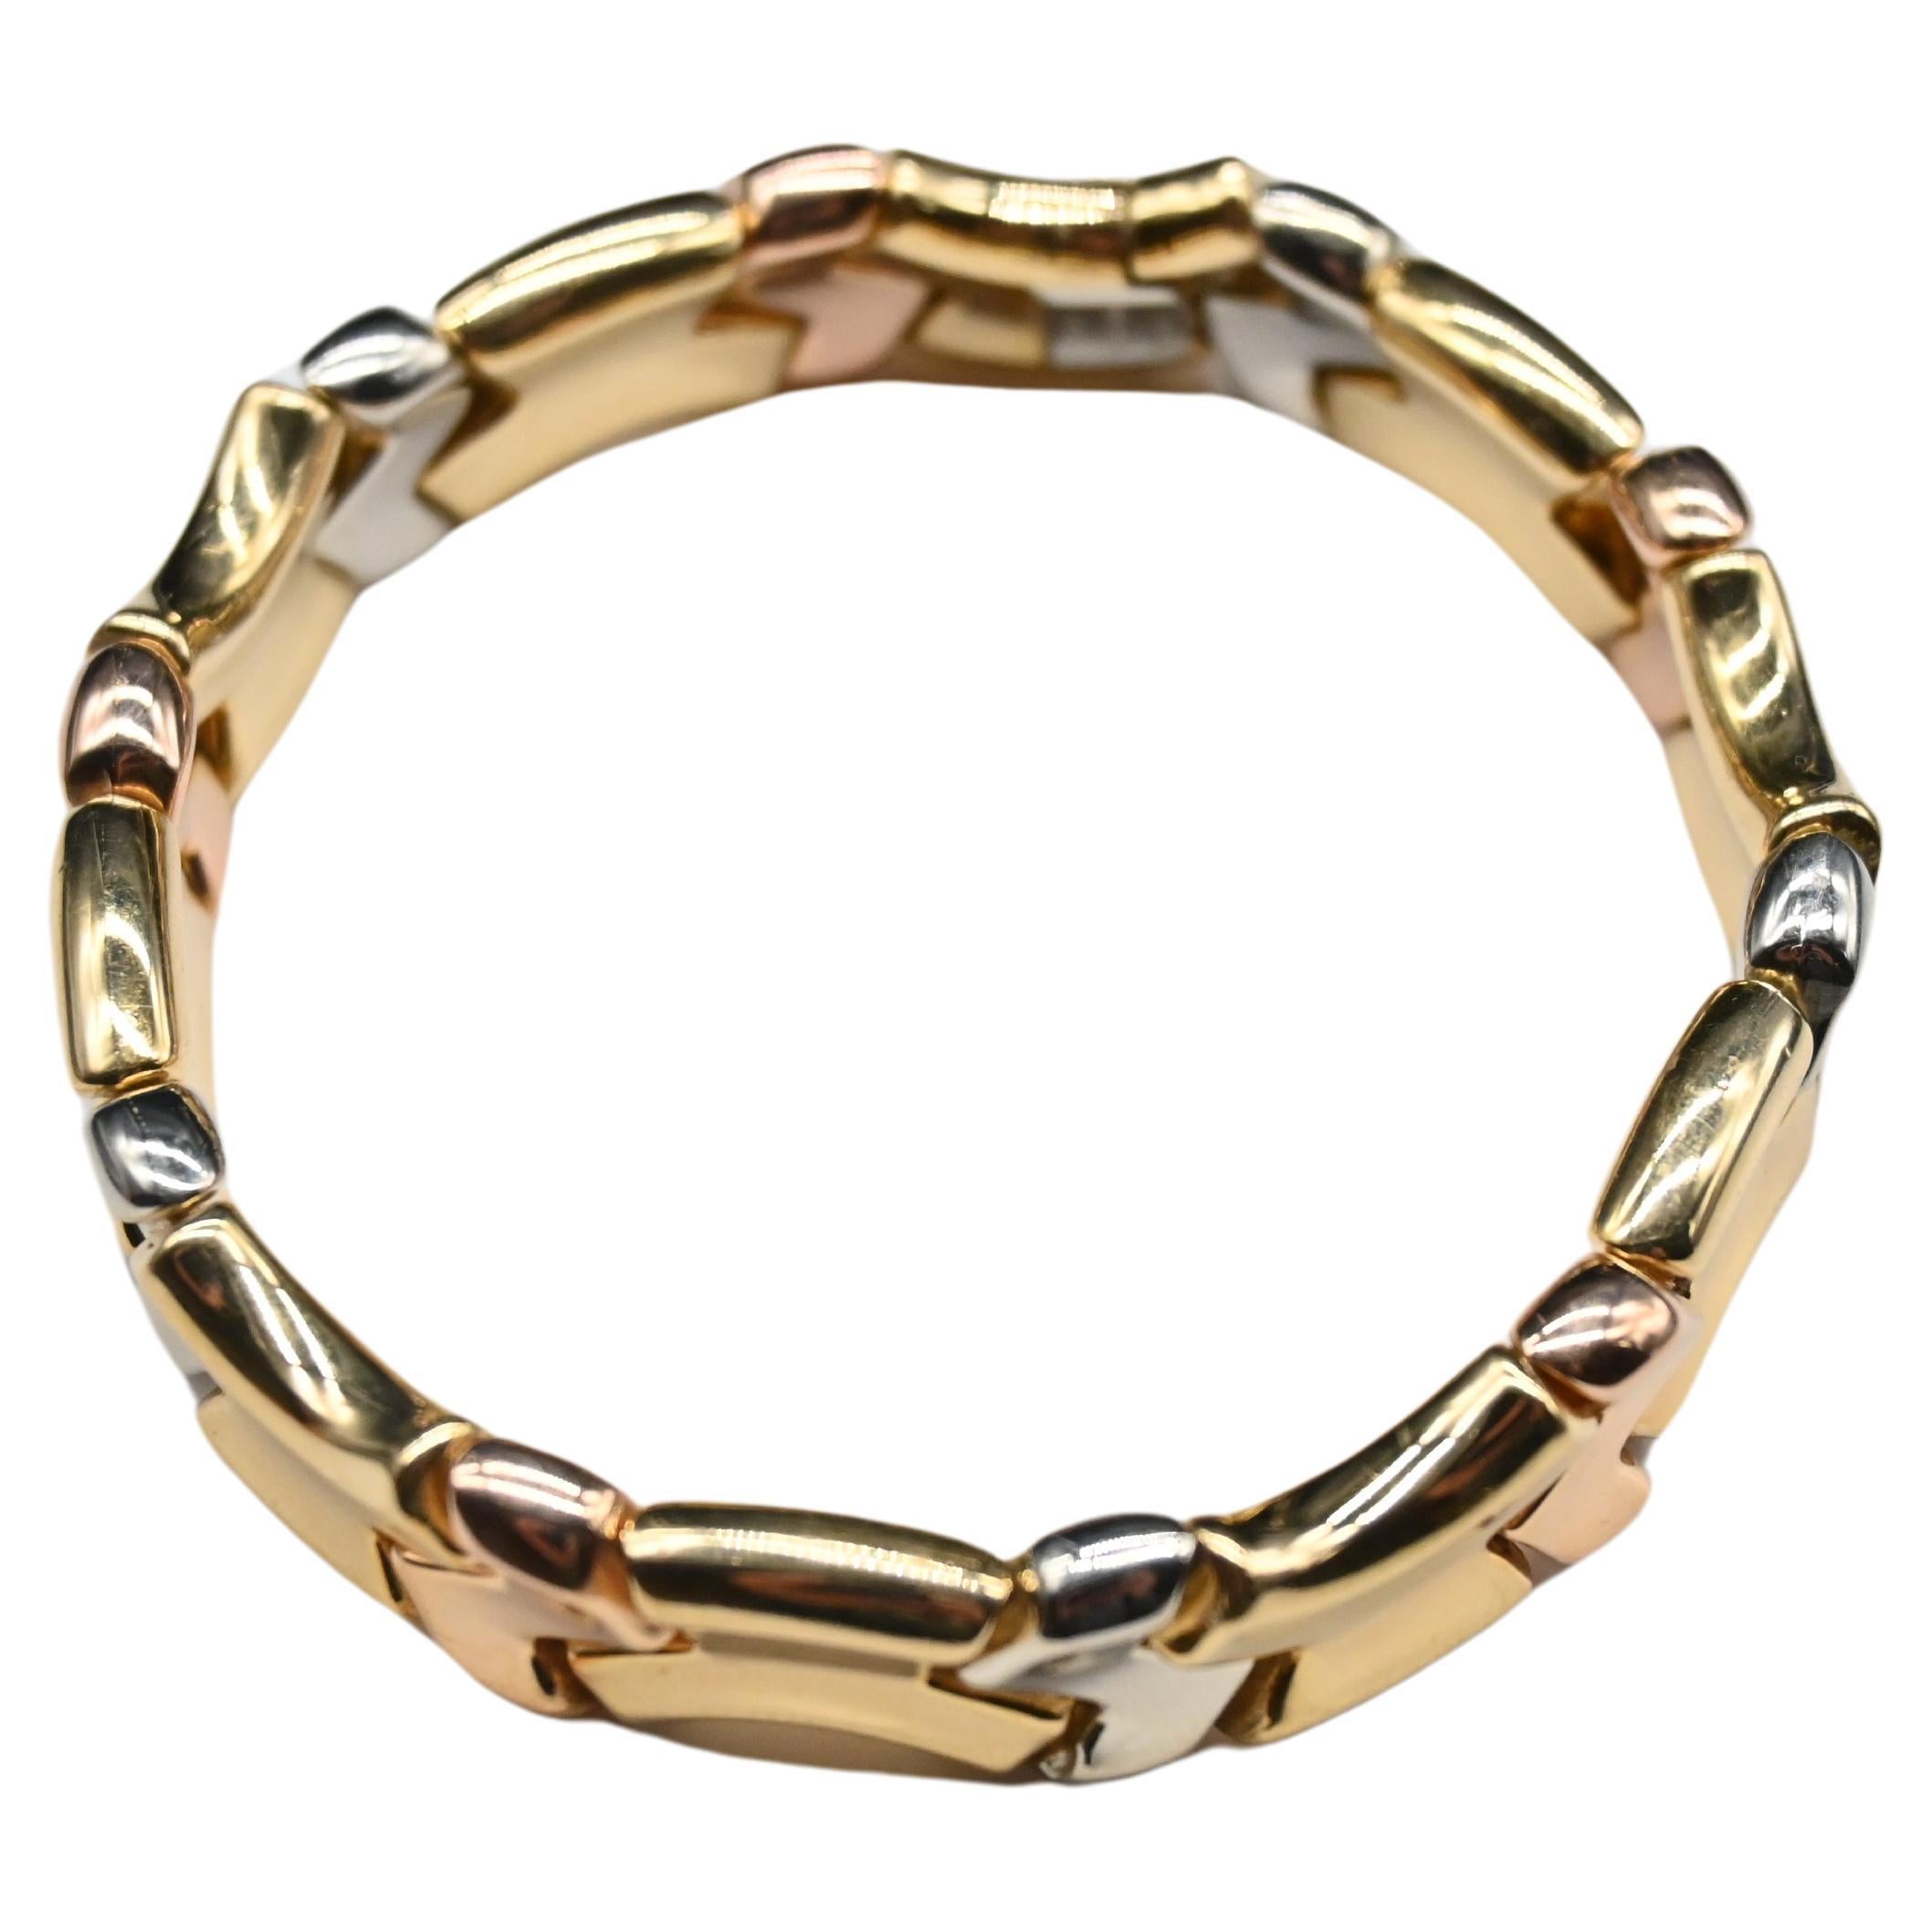 Discover our tricolor bracelet in three golds. Crafted with precision, this bracelet embodies the elegance of the 1980s while adding a contemporary touch to your style.

This bracelet is crafted from a harmonious blend of 18-carat yellow, rose and